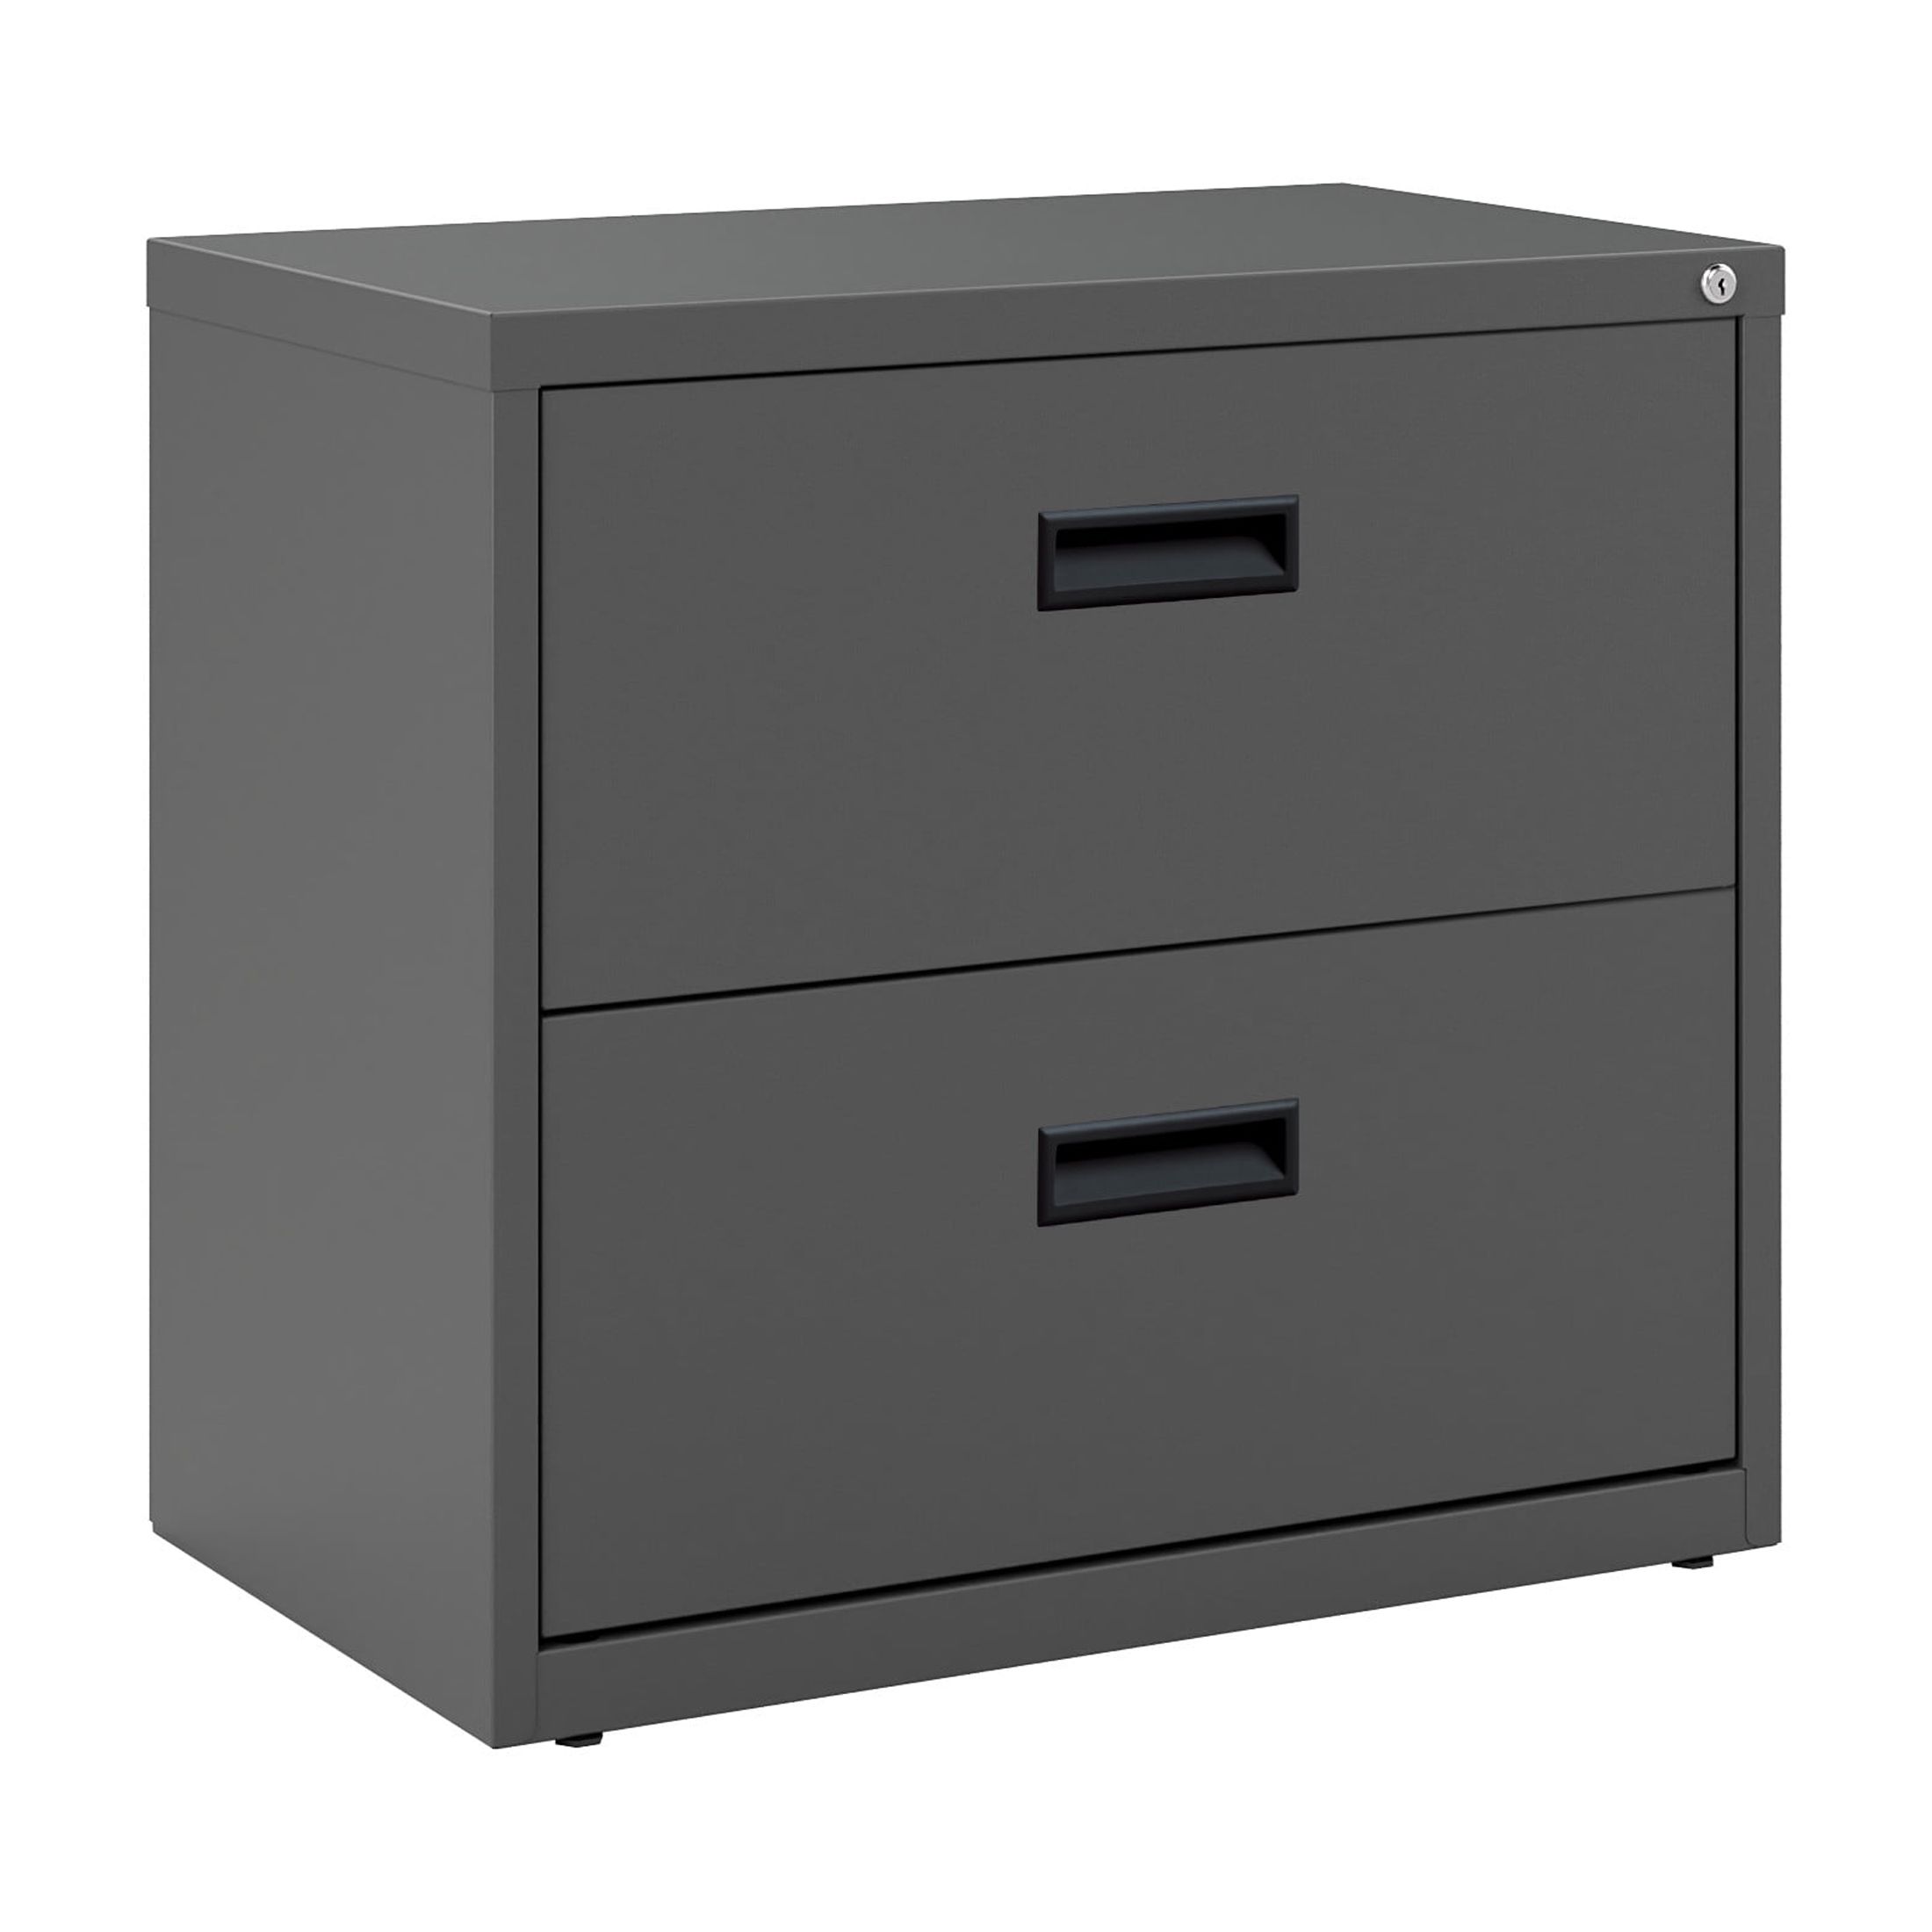 Hirsh 30 inch Wide 2 Drawer Lateral File Cabinet for Home or Office, Charcoal - image 1 of 5